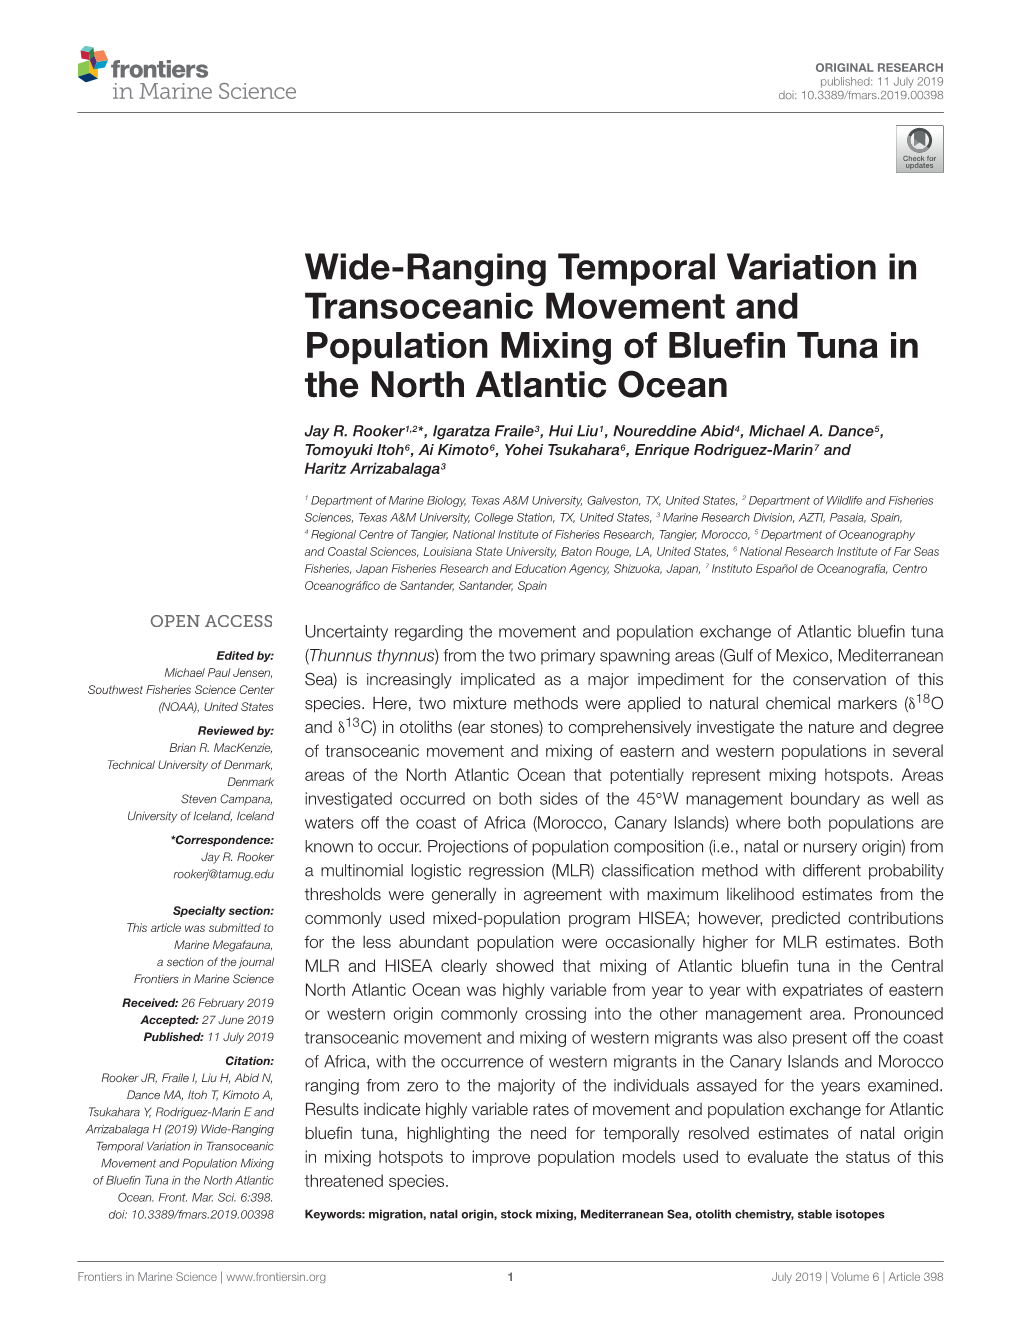 Wide-Ranging Temporal Variation in Transoceanic Movement and Population Mixing of Blueﬁn Tuna in the North Atlantic Ocean